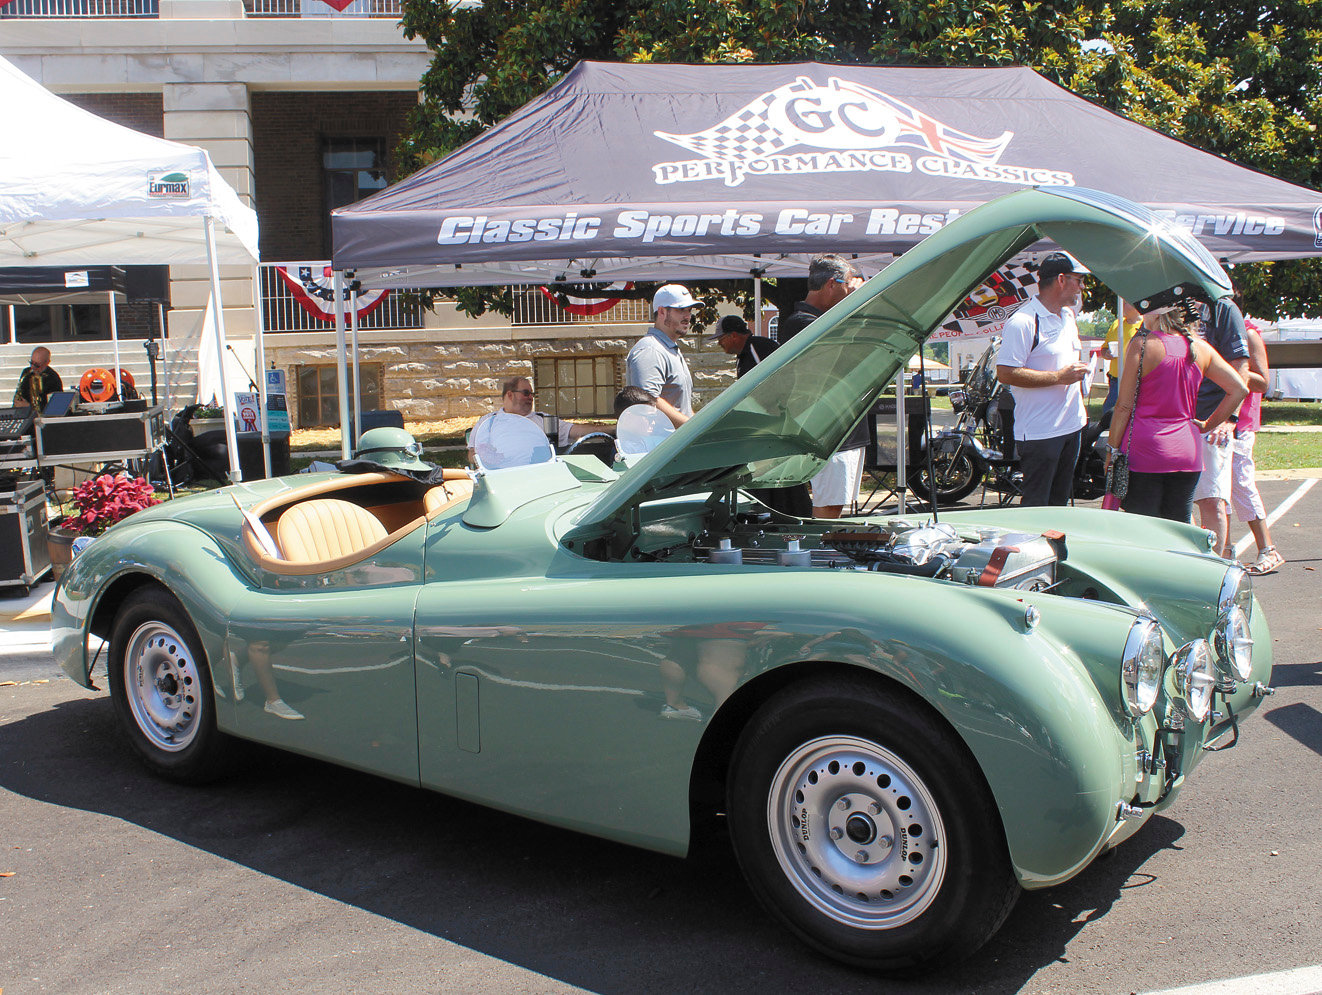 GC Performance Classics, currently of Nashville but planning a move to Shelbyville, displayed this early Jaguar.